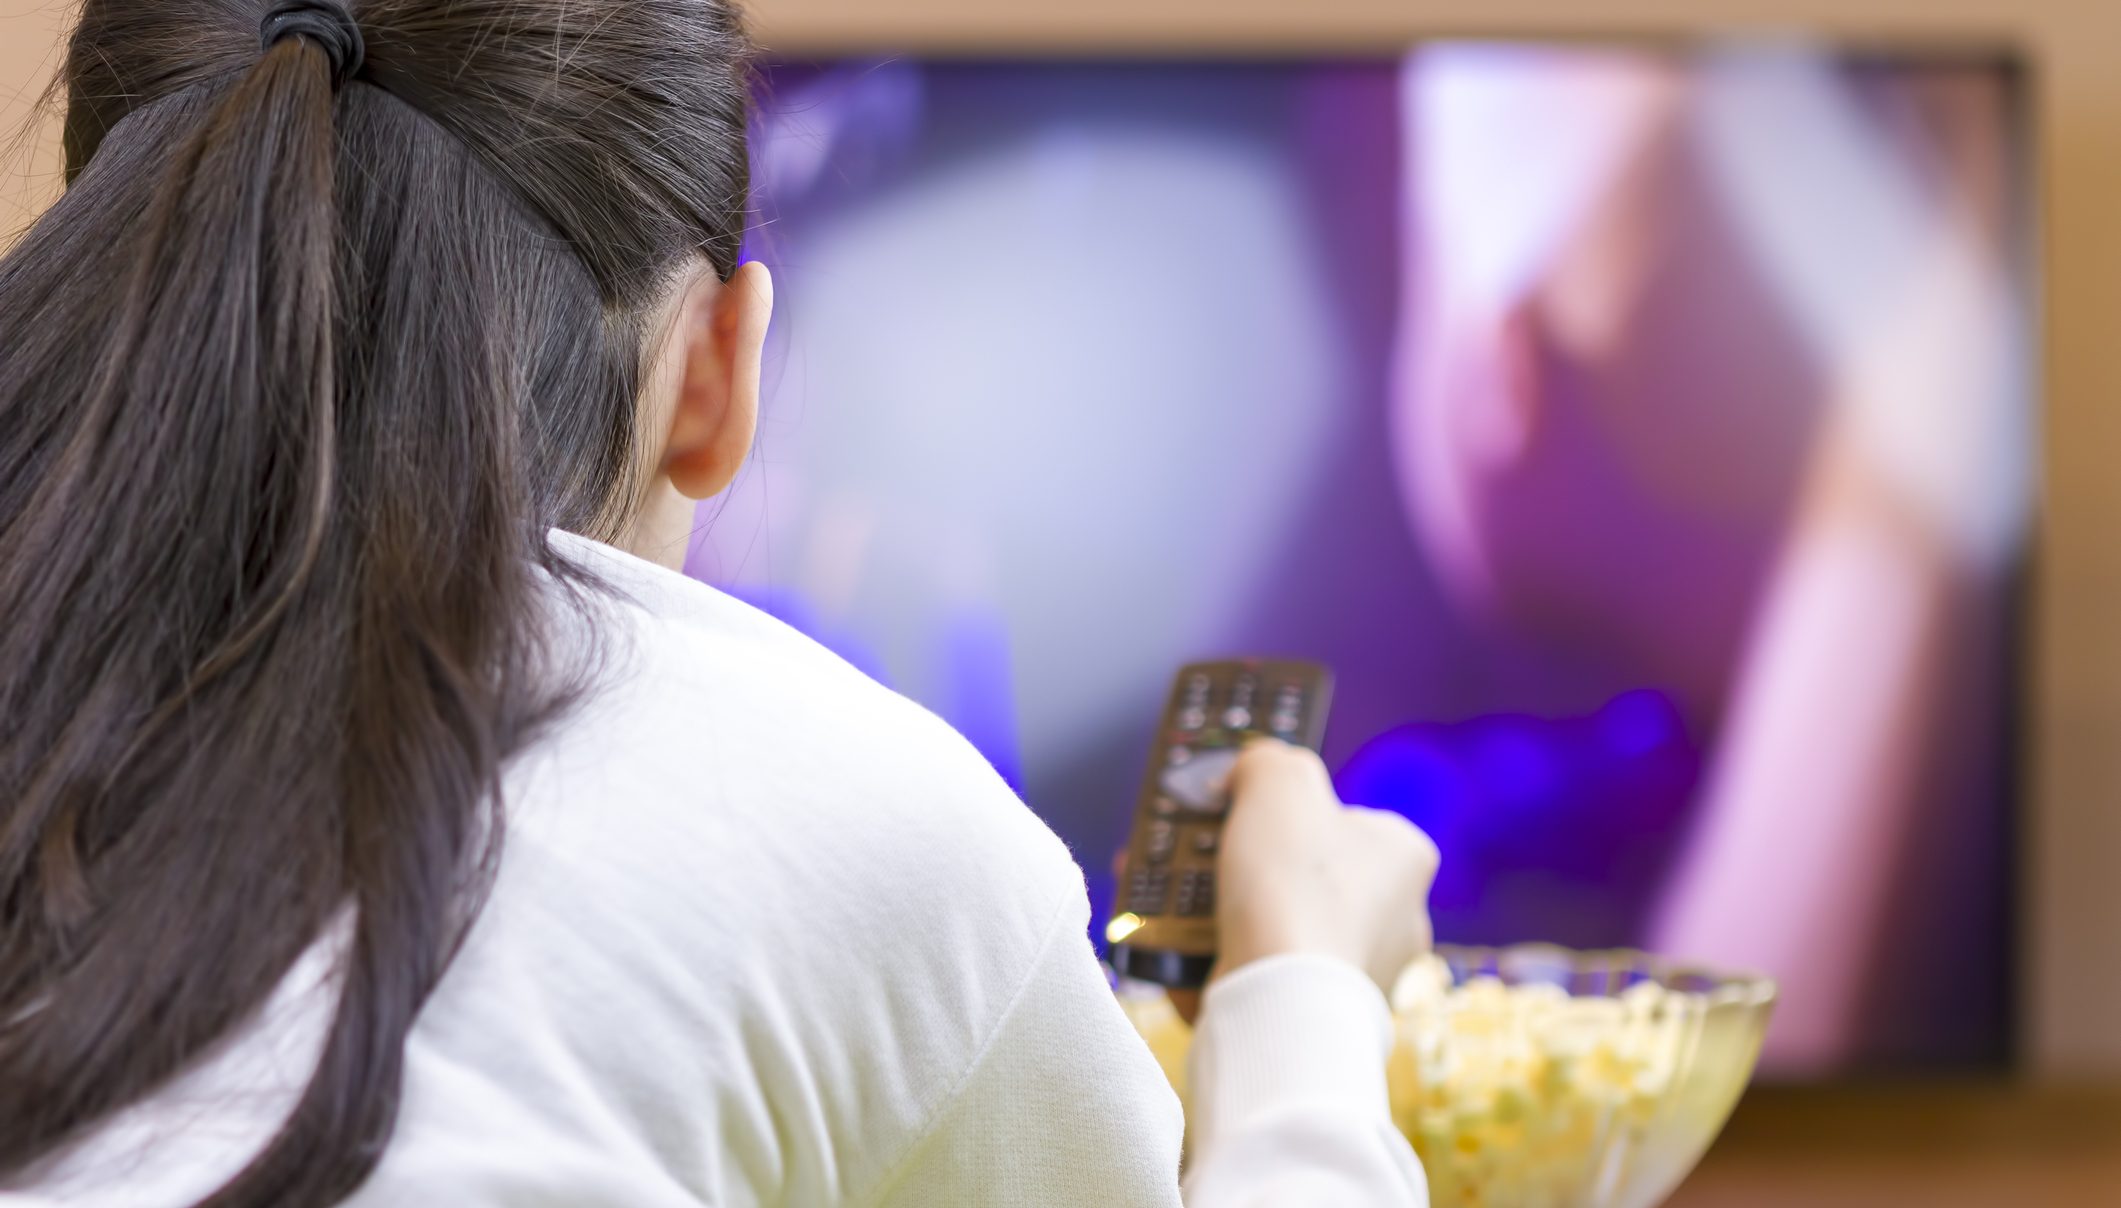 45% of Americans Primarily Stream Their TV as Cord Cutting Grows